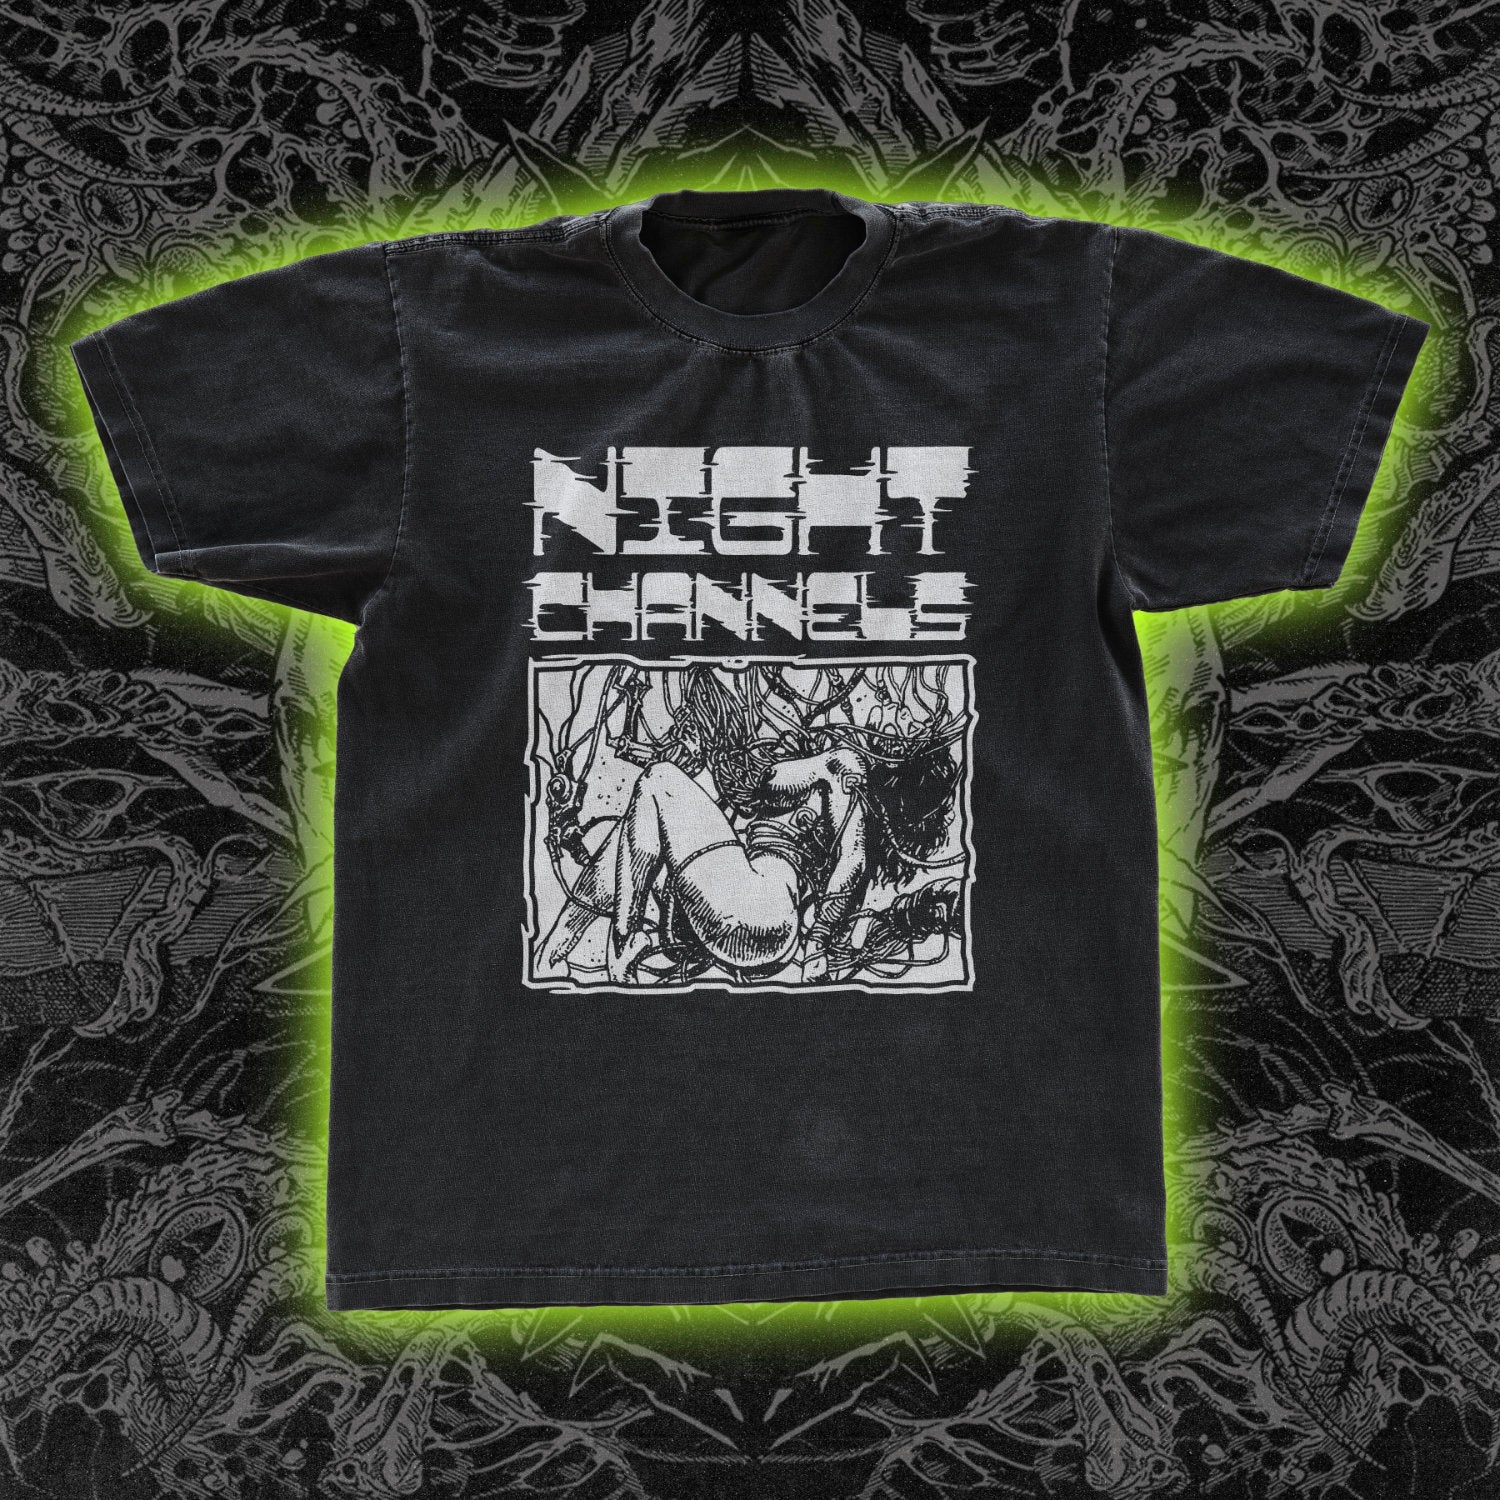 Cyber Sex Night Channels Classic Tee